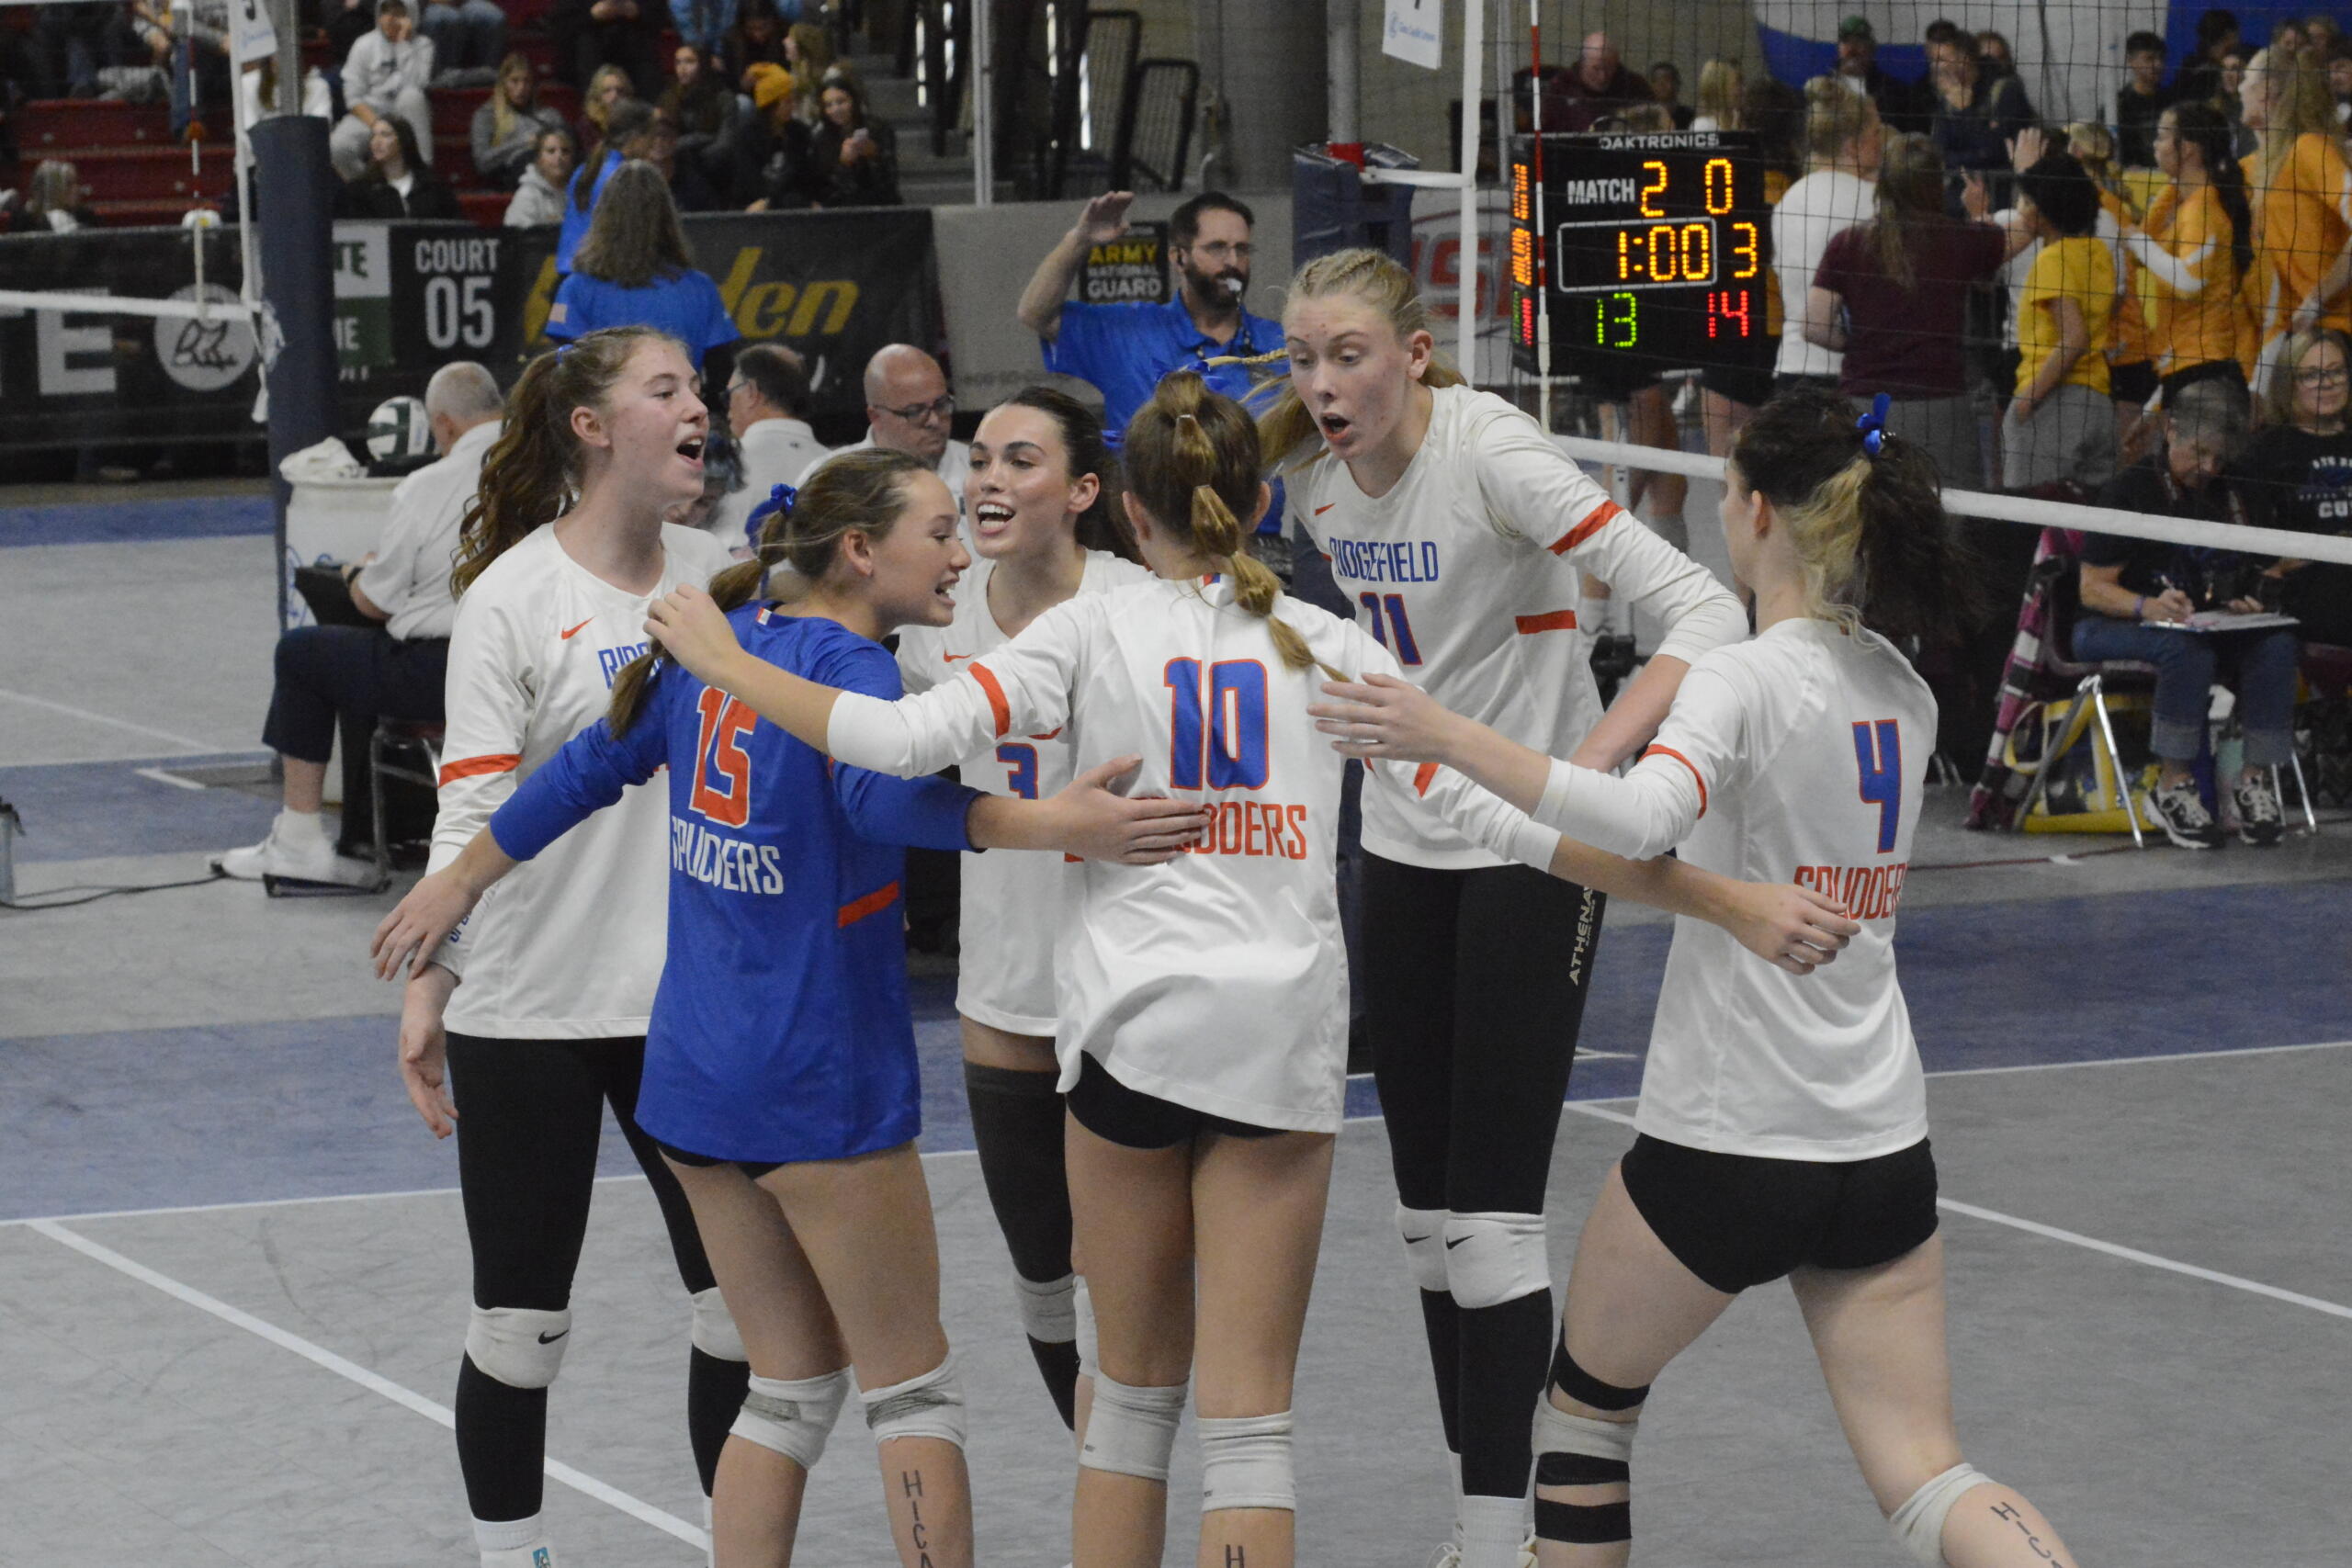 The Ridgefield volleyball team gathers after a point against Sedro-Woolley in a first-round match of the Class 2A state volleyball tournament on Friday, Nov. 18, 2022 in Yakima.